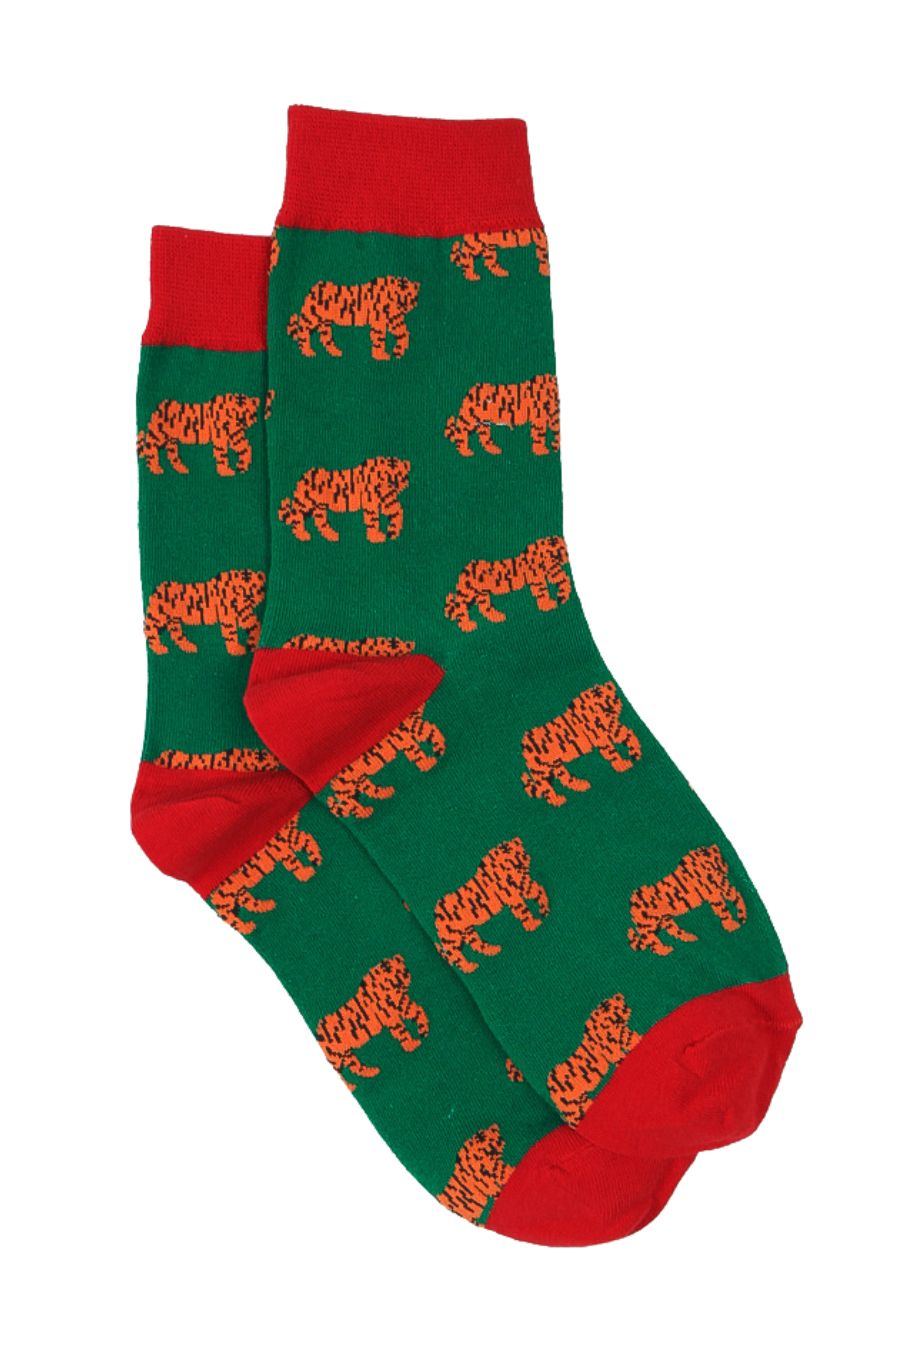 green and red dress socks with orange tigers all over